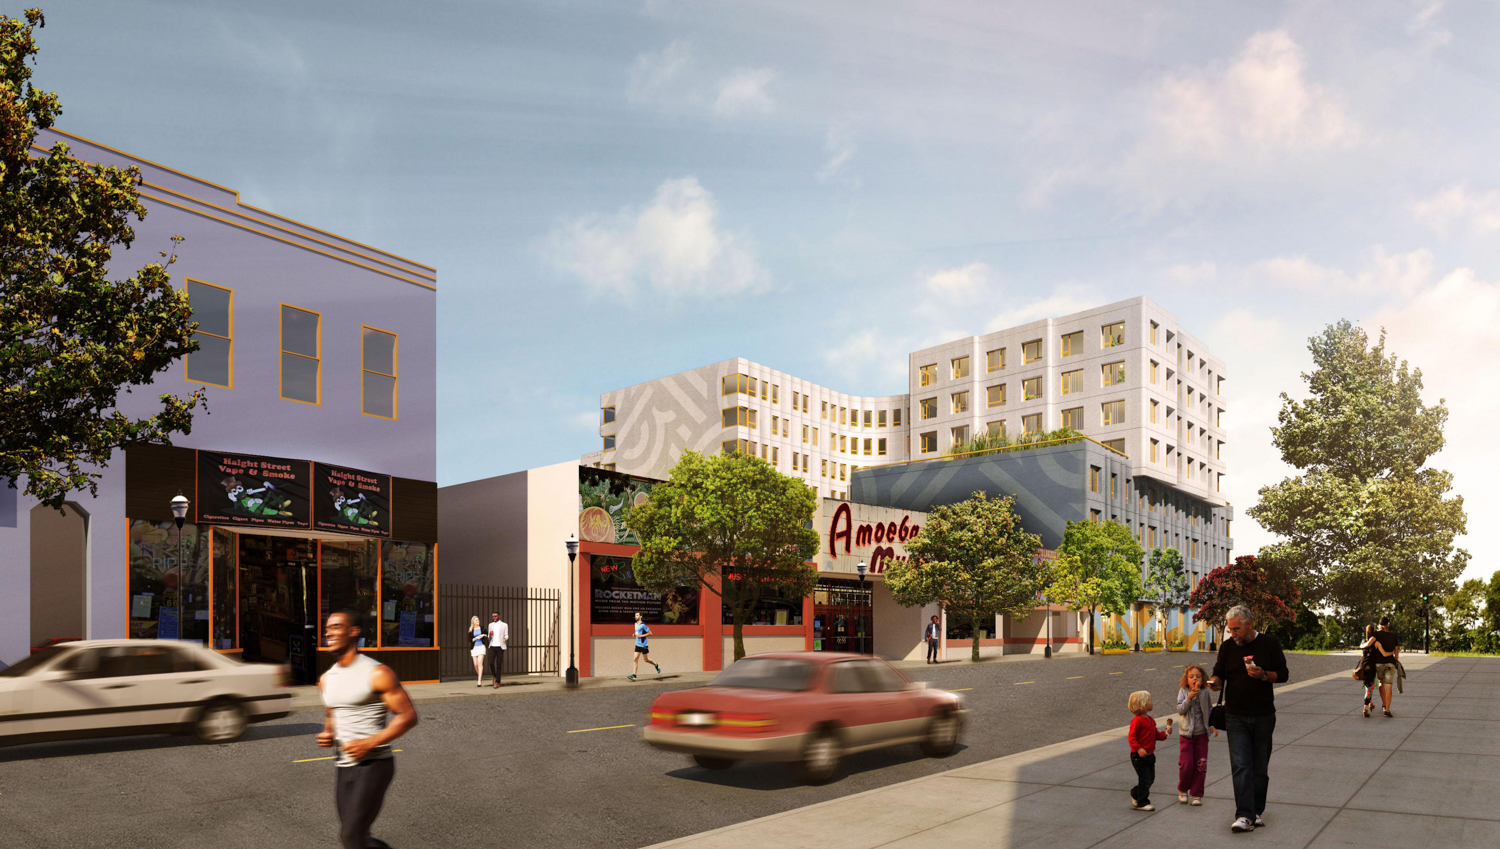 730 Stanyan Street seen from Haight Street, rendering by OMA